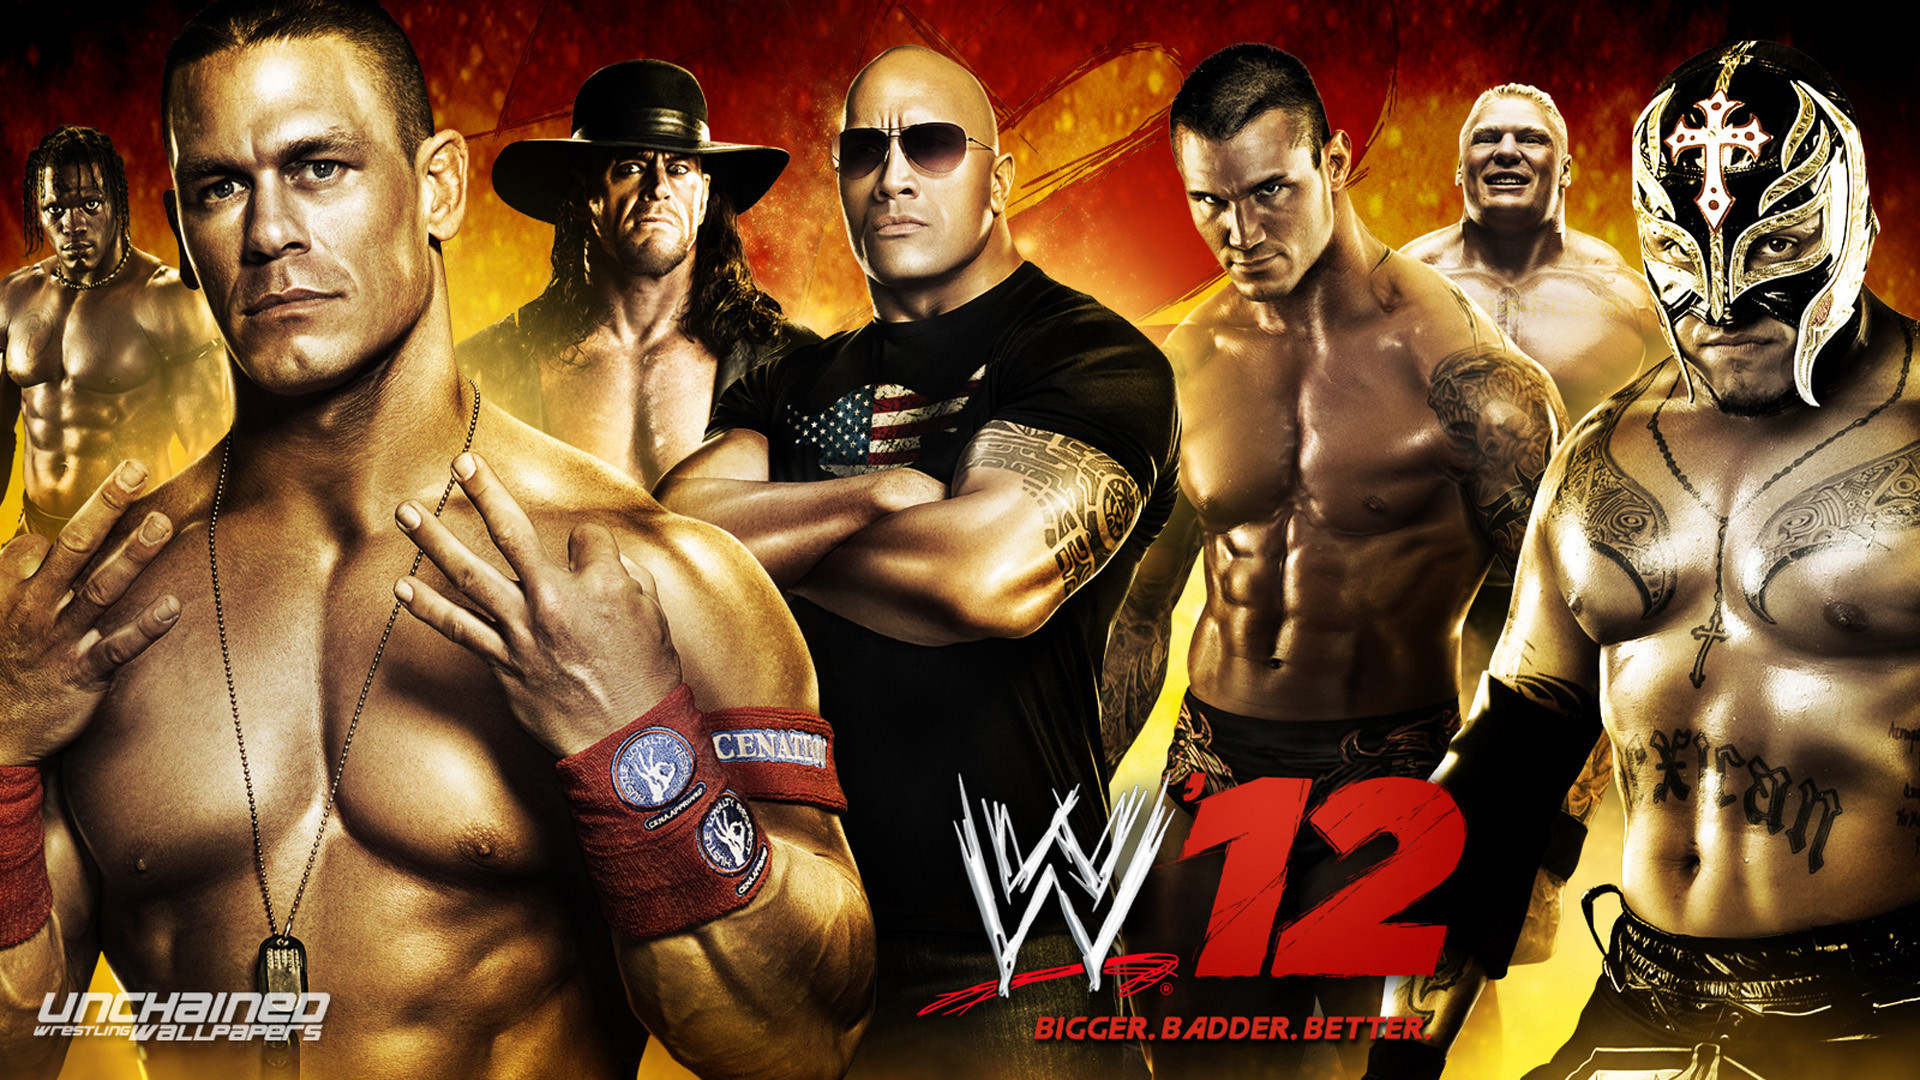 1920x1080 WWE HD wallpaper for download in laptop and desktop